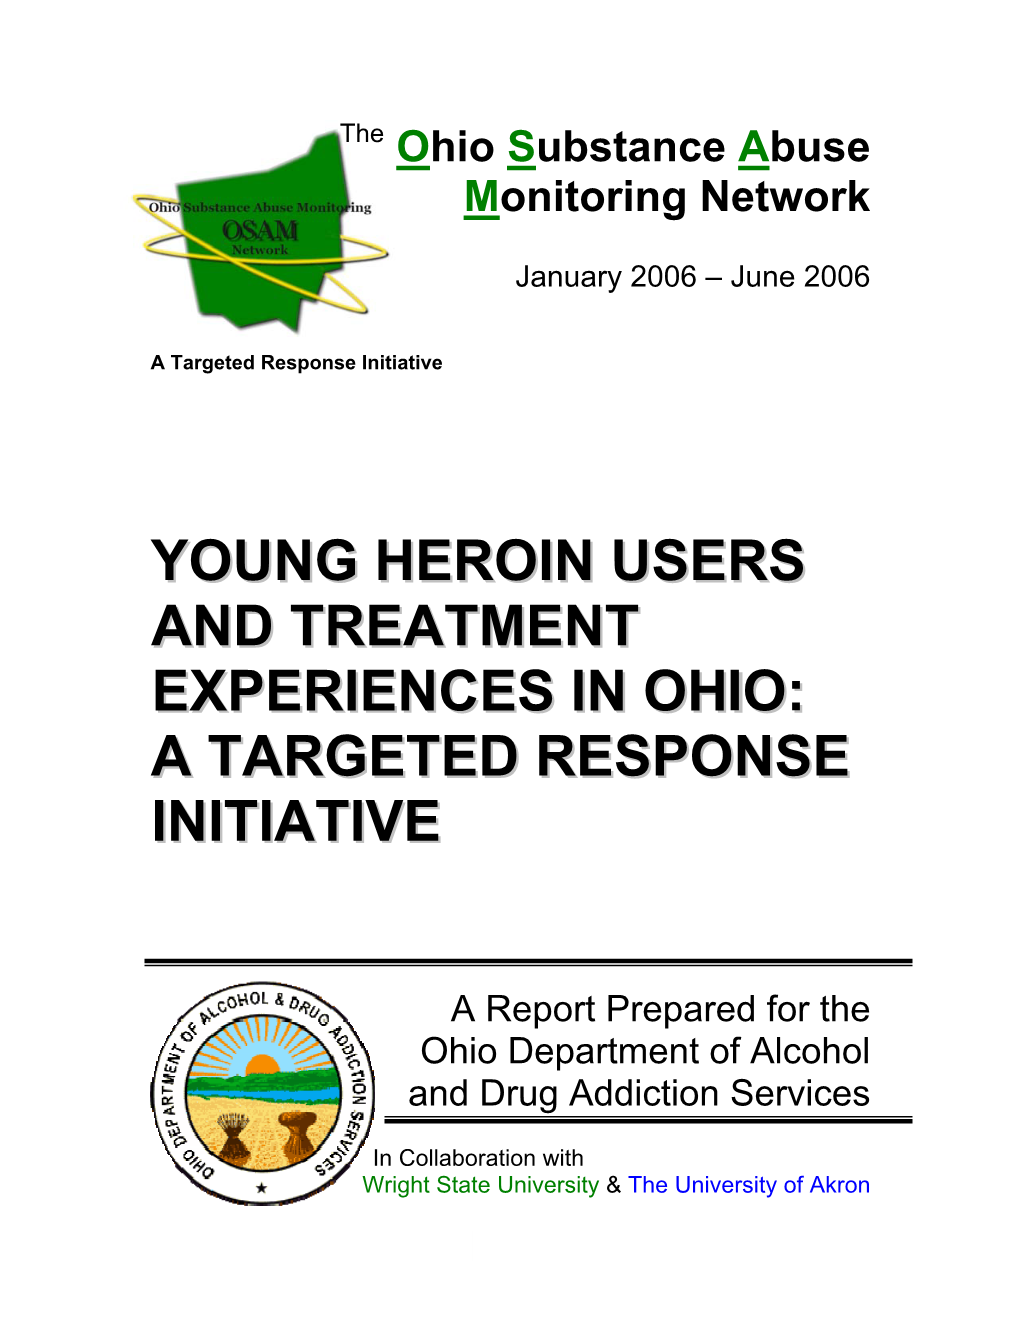 Young Heroin Users and Treatment Experiences in Ohio